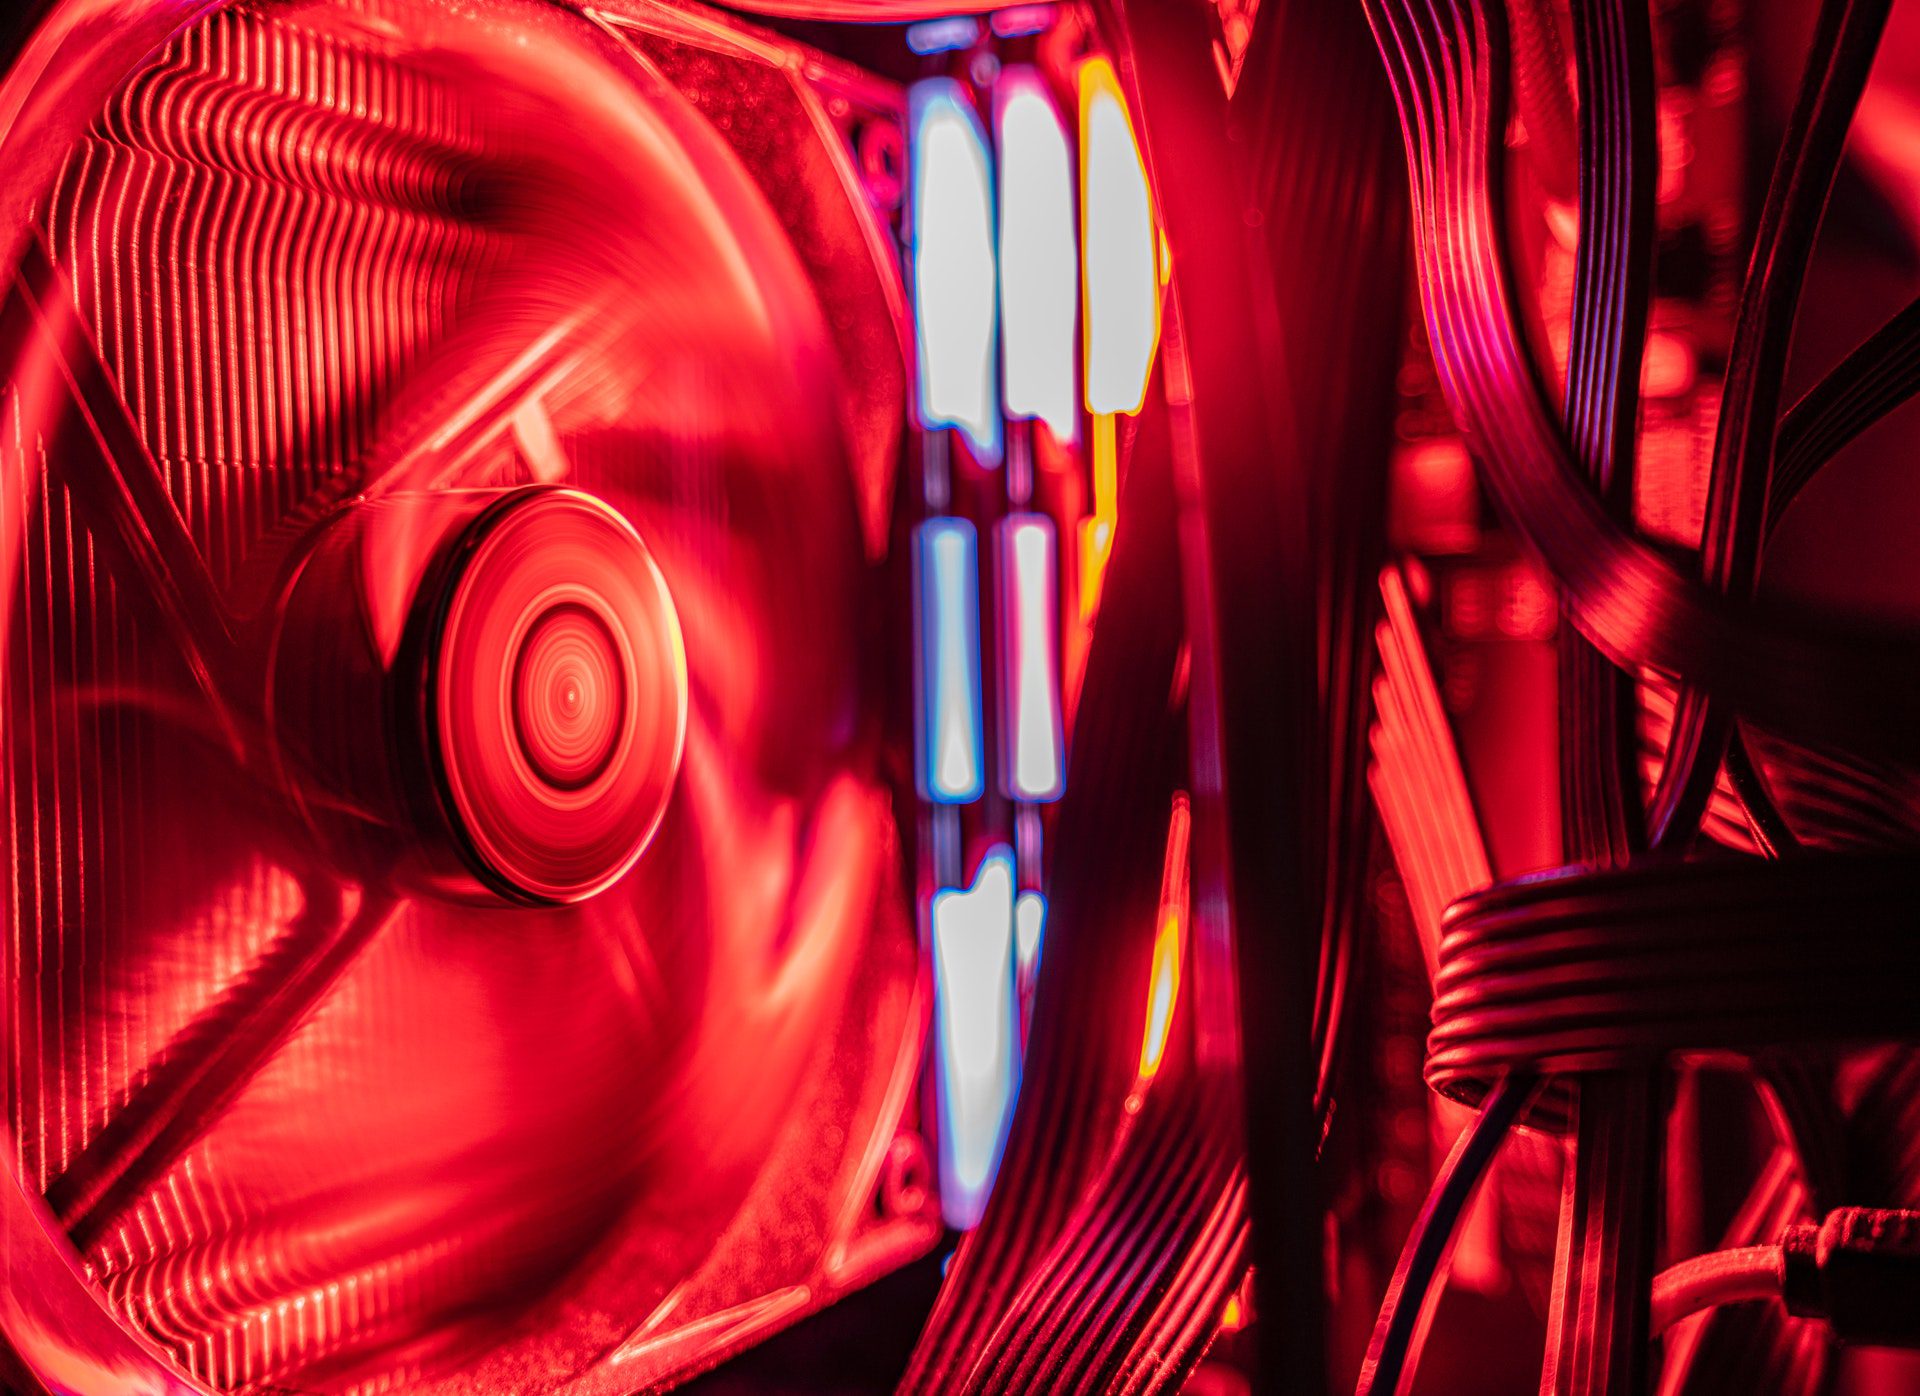 Computer exhaust fan with red light overlay